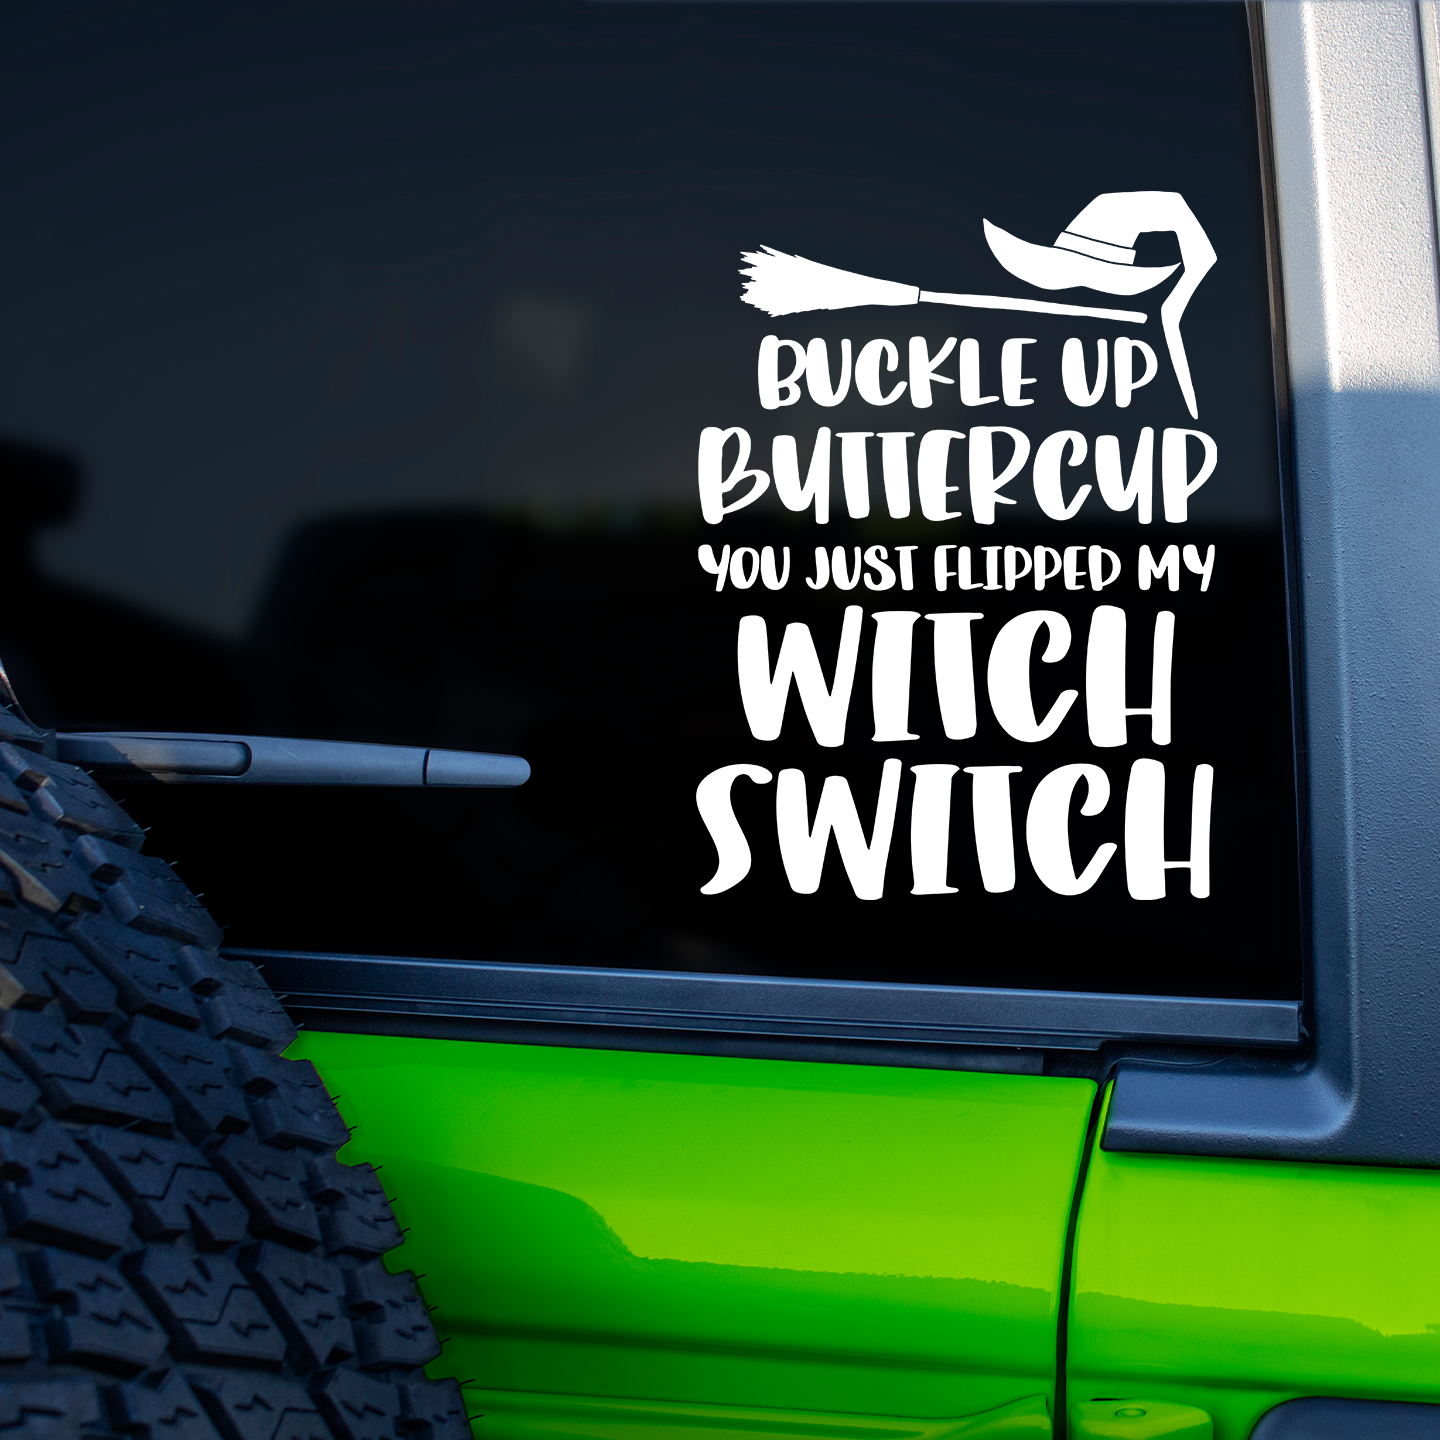 Buckle Up Buttercup Witch Switch Sticker